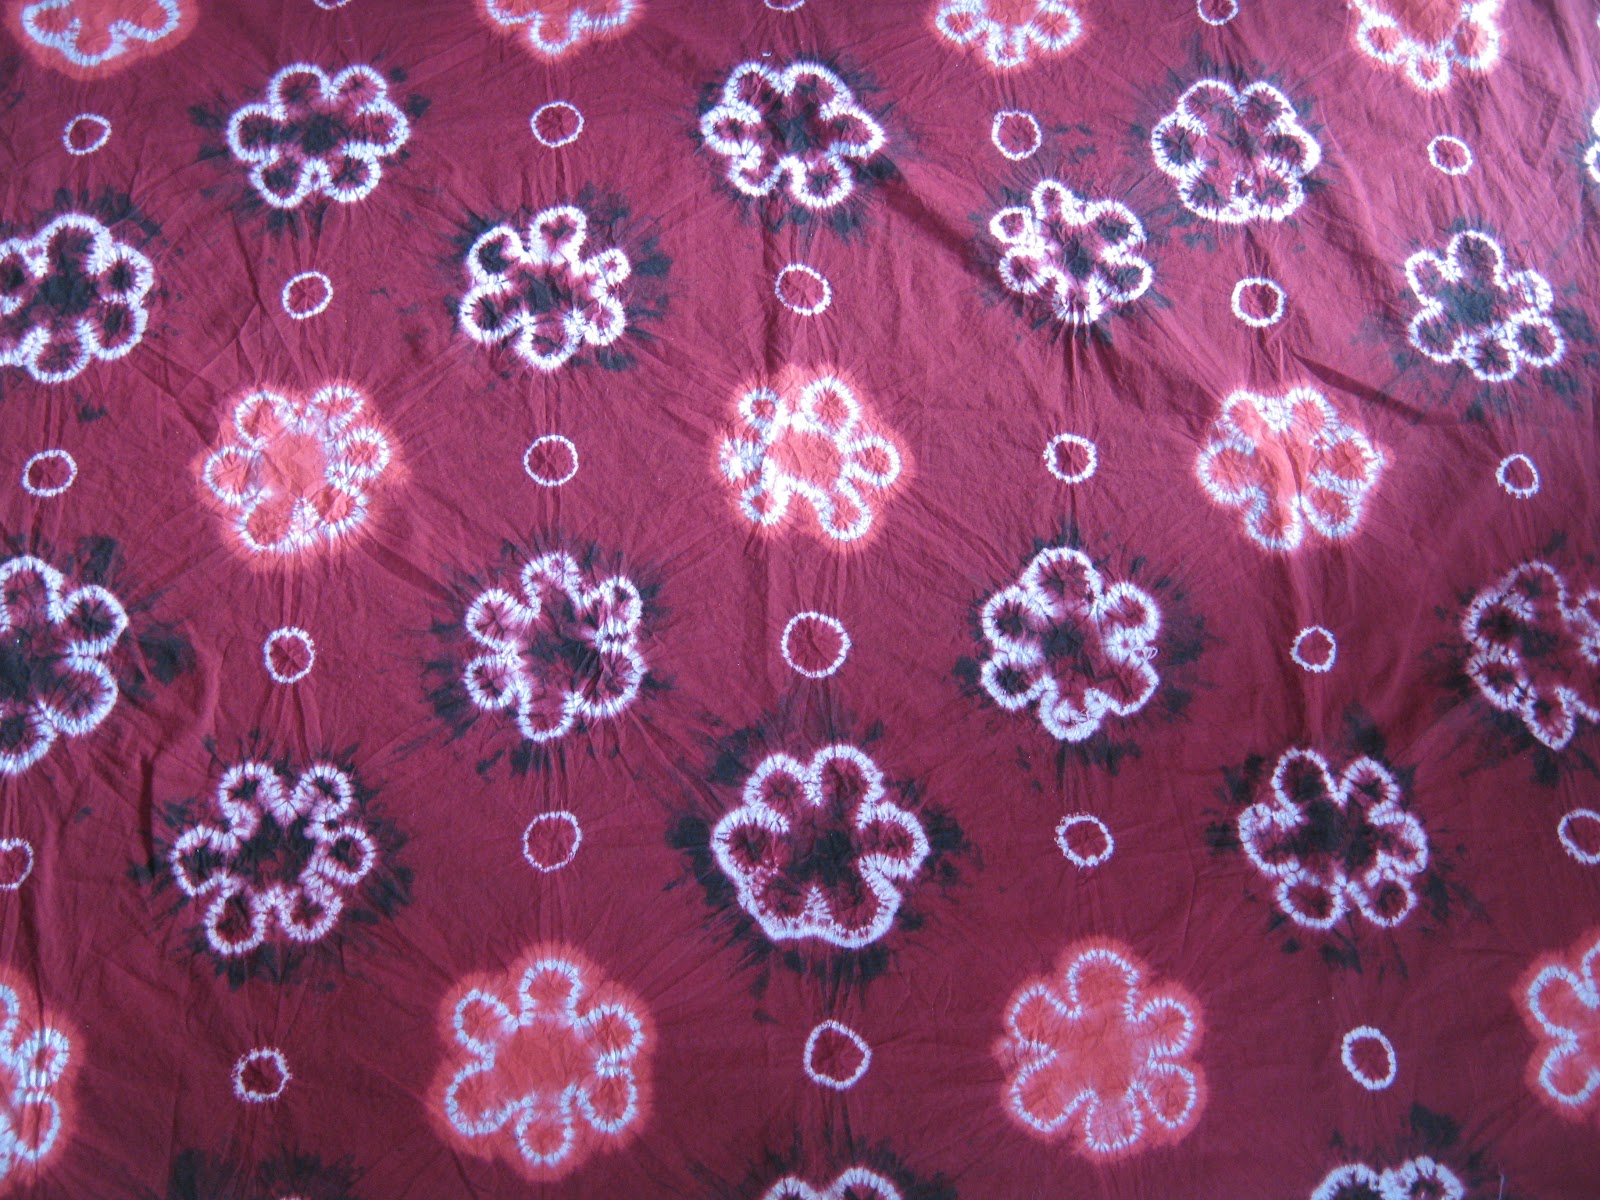  Batik  jumputan  what was it and how to made Selling 